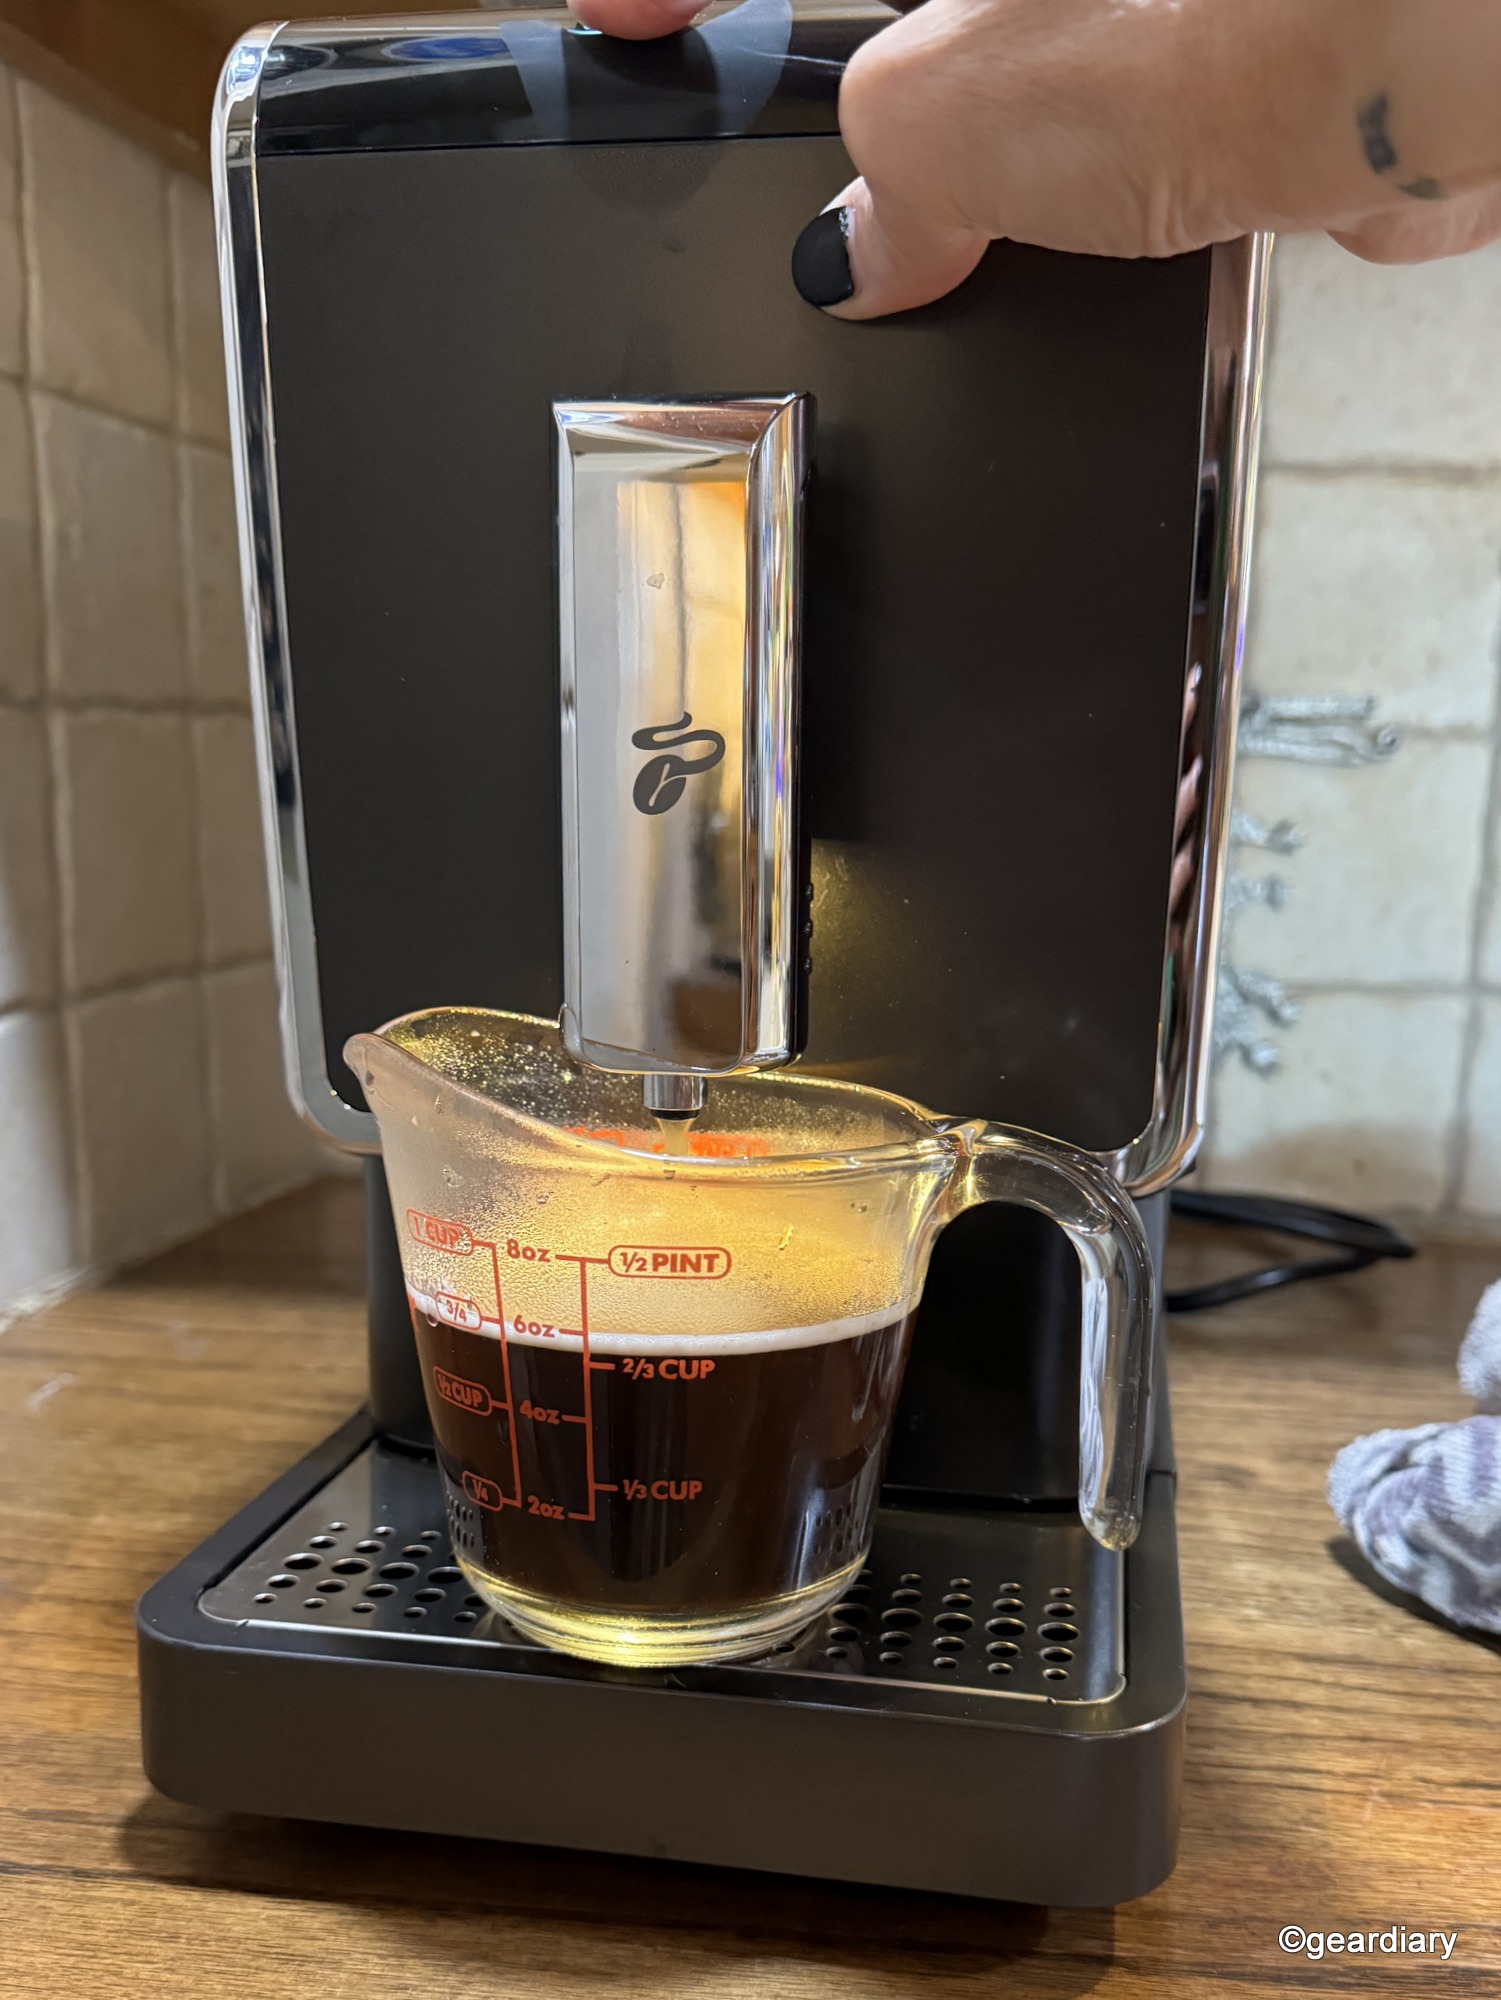 Adjusting the size of a regular coffee